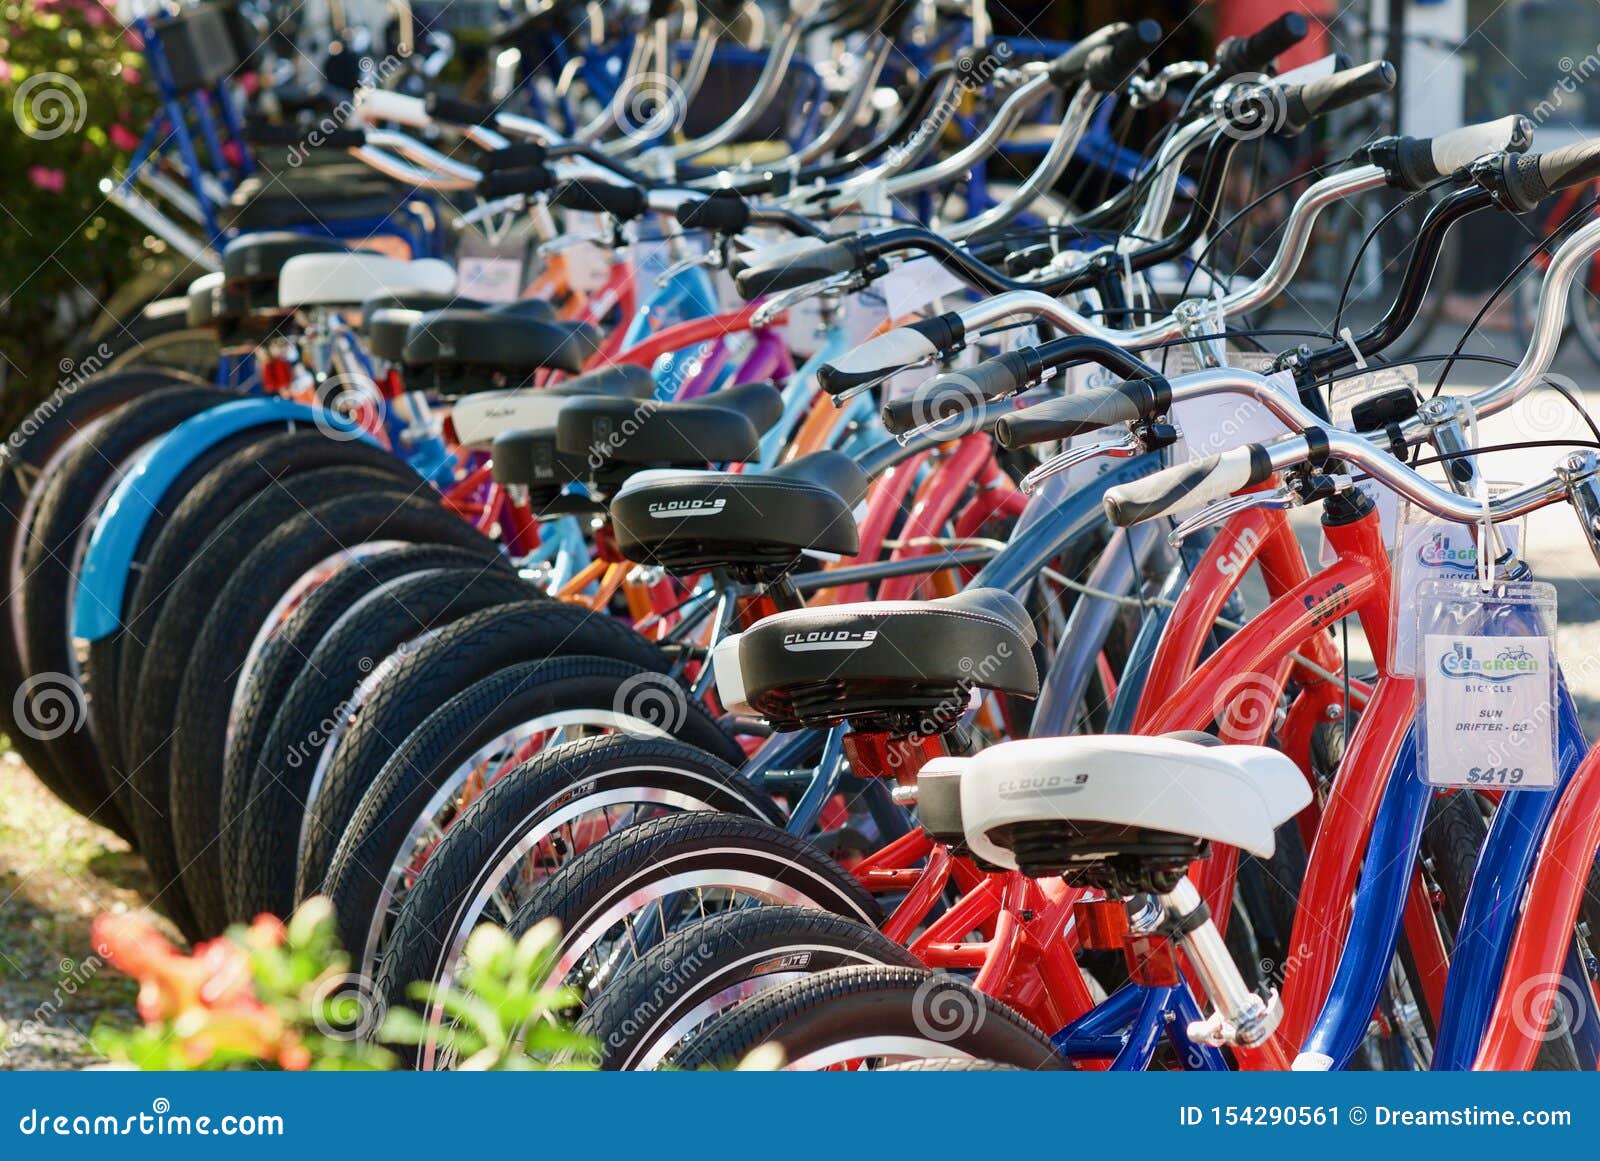 Bikes for Sale in a Row editorial photo